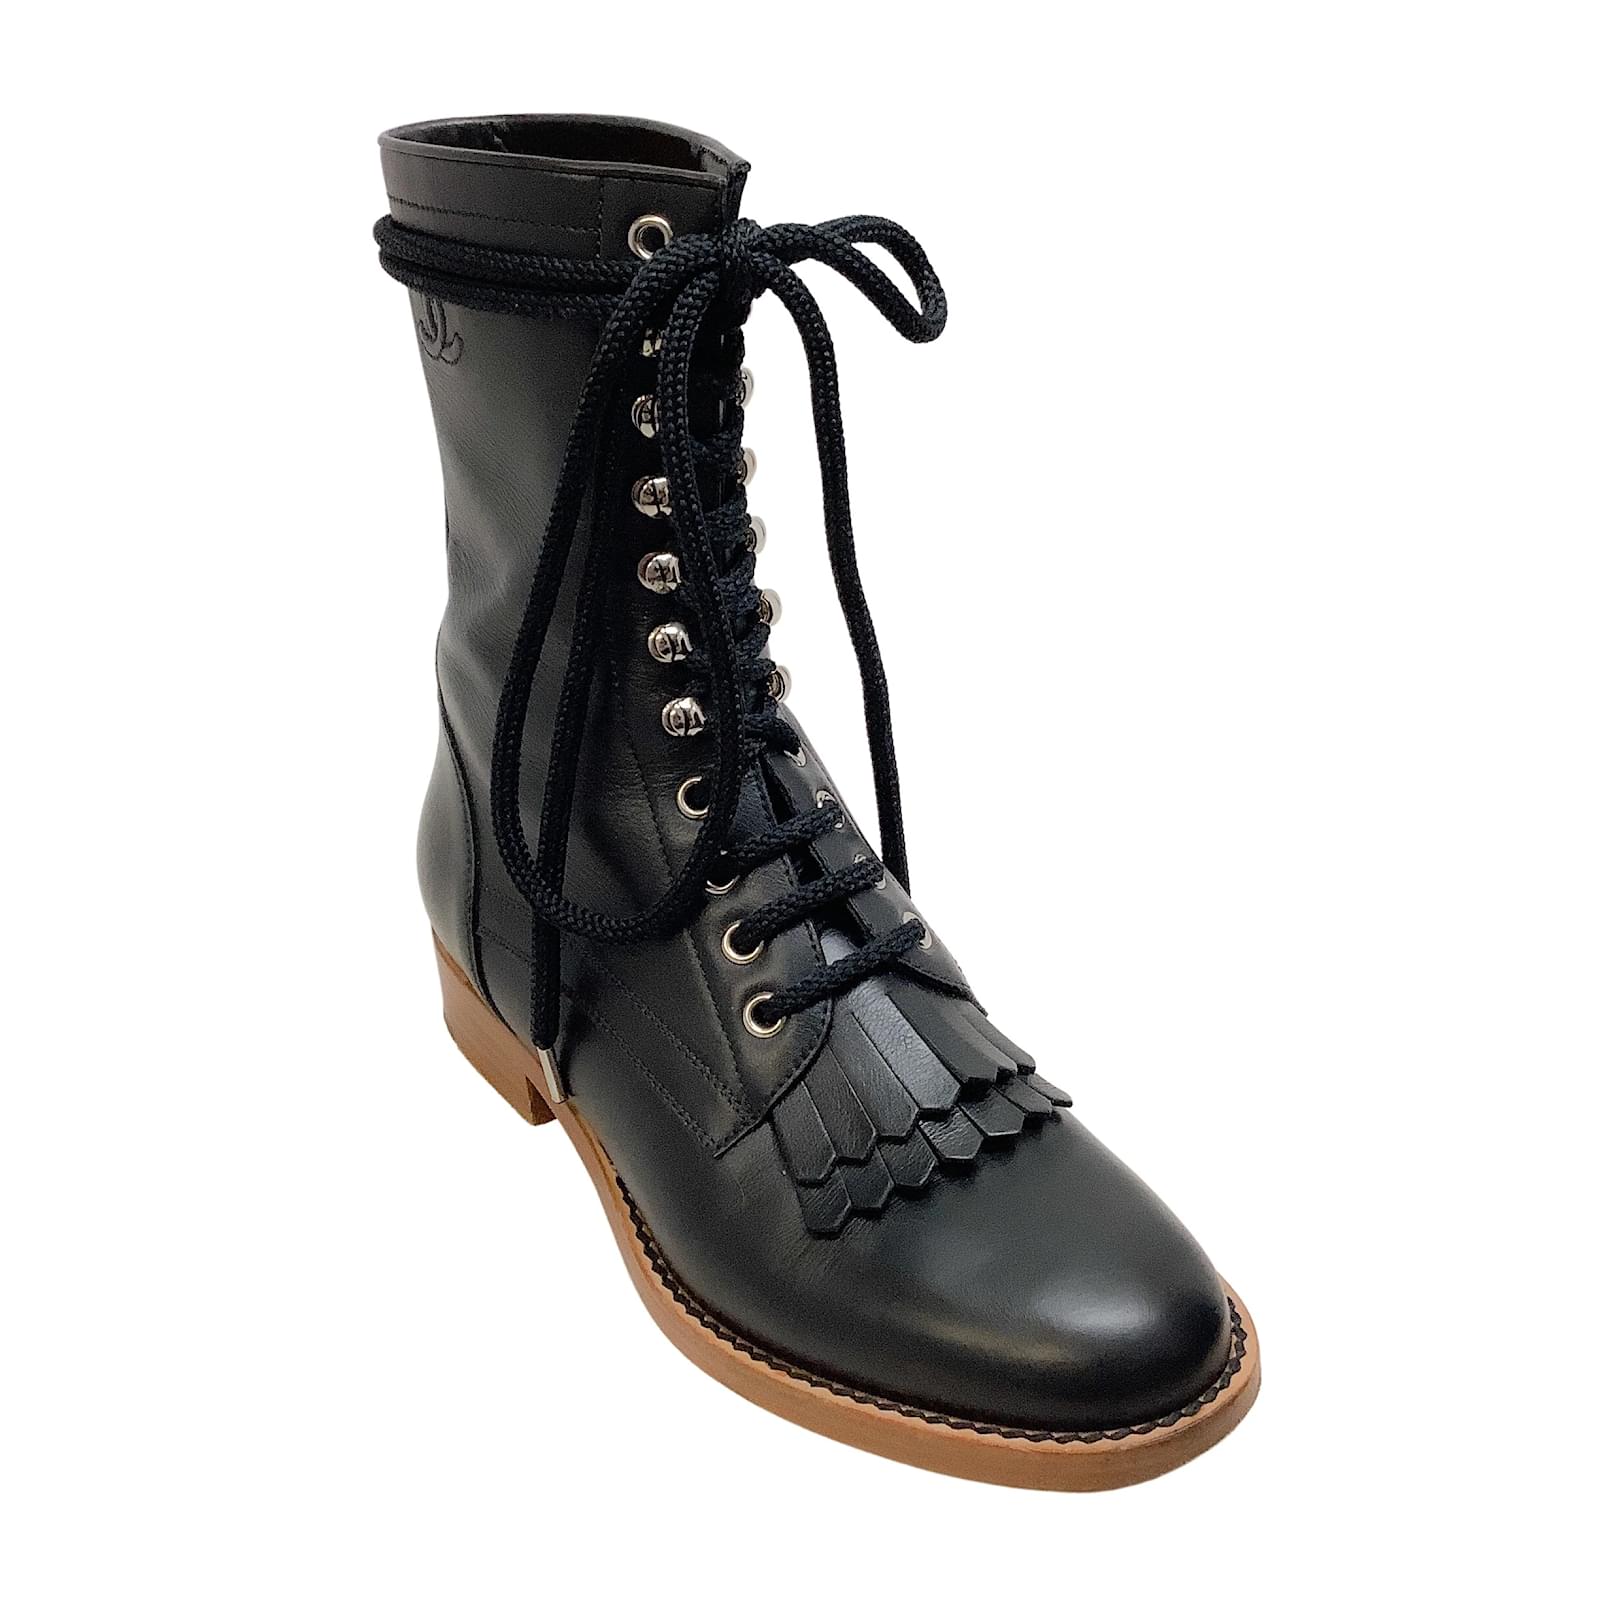 Ankle Boots Chanel Chanel Black Leather Combat with Brogue Detail Boots/Booties